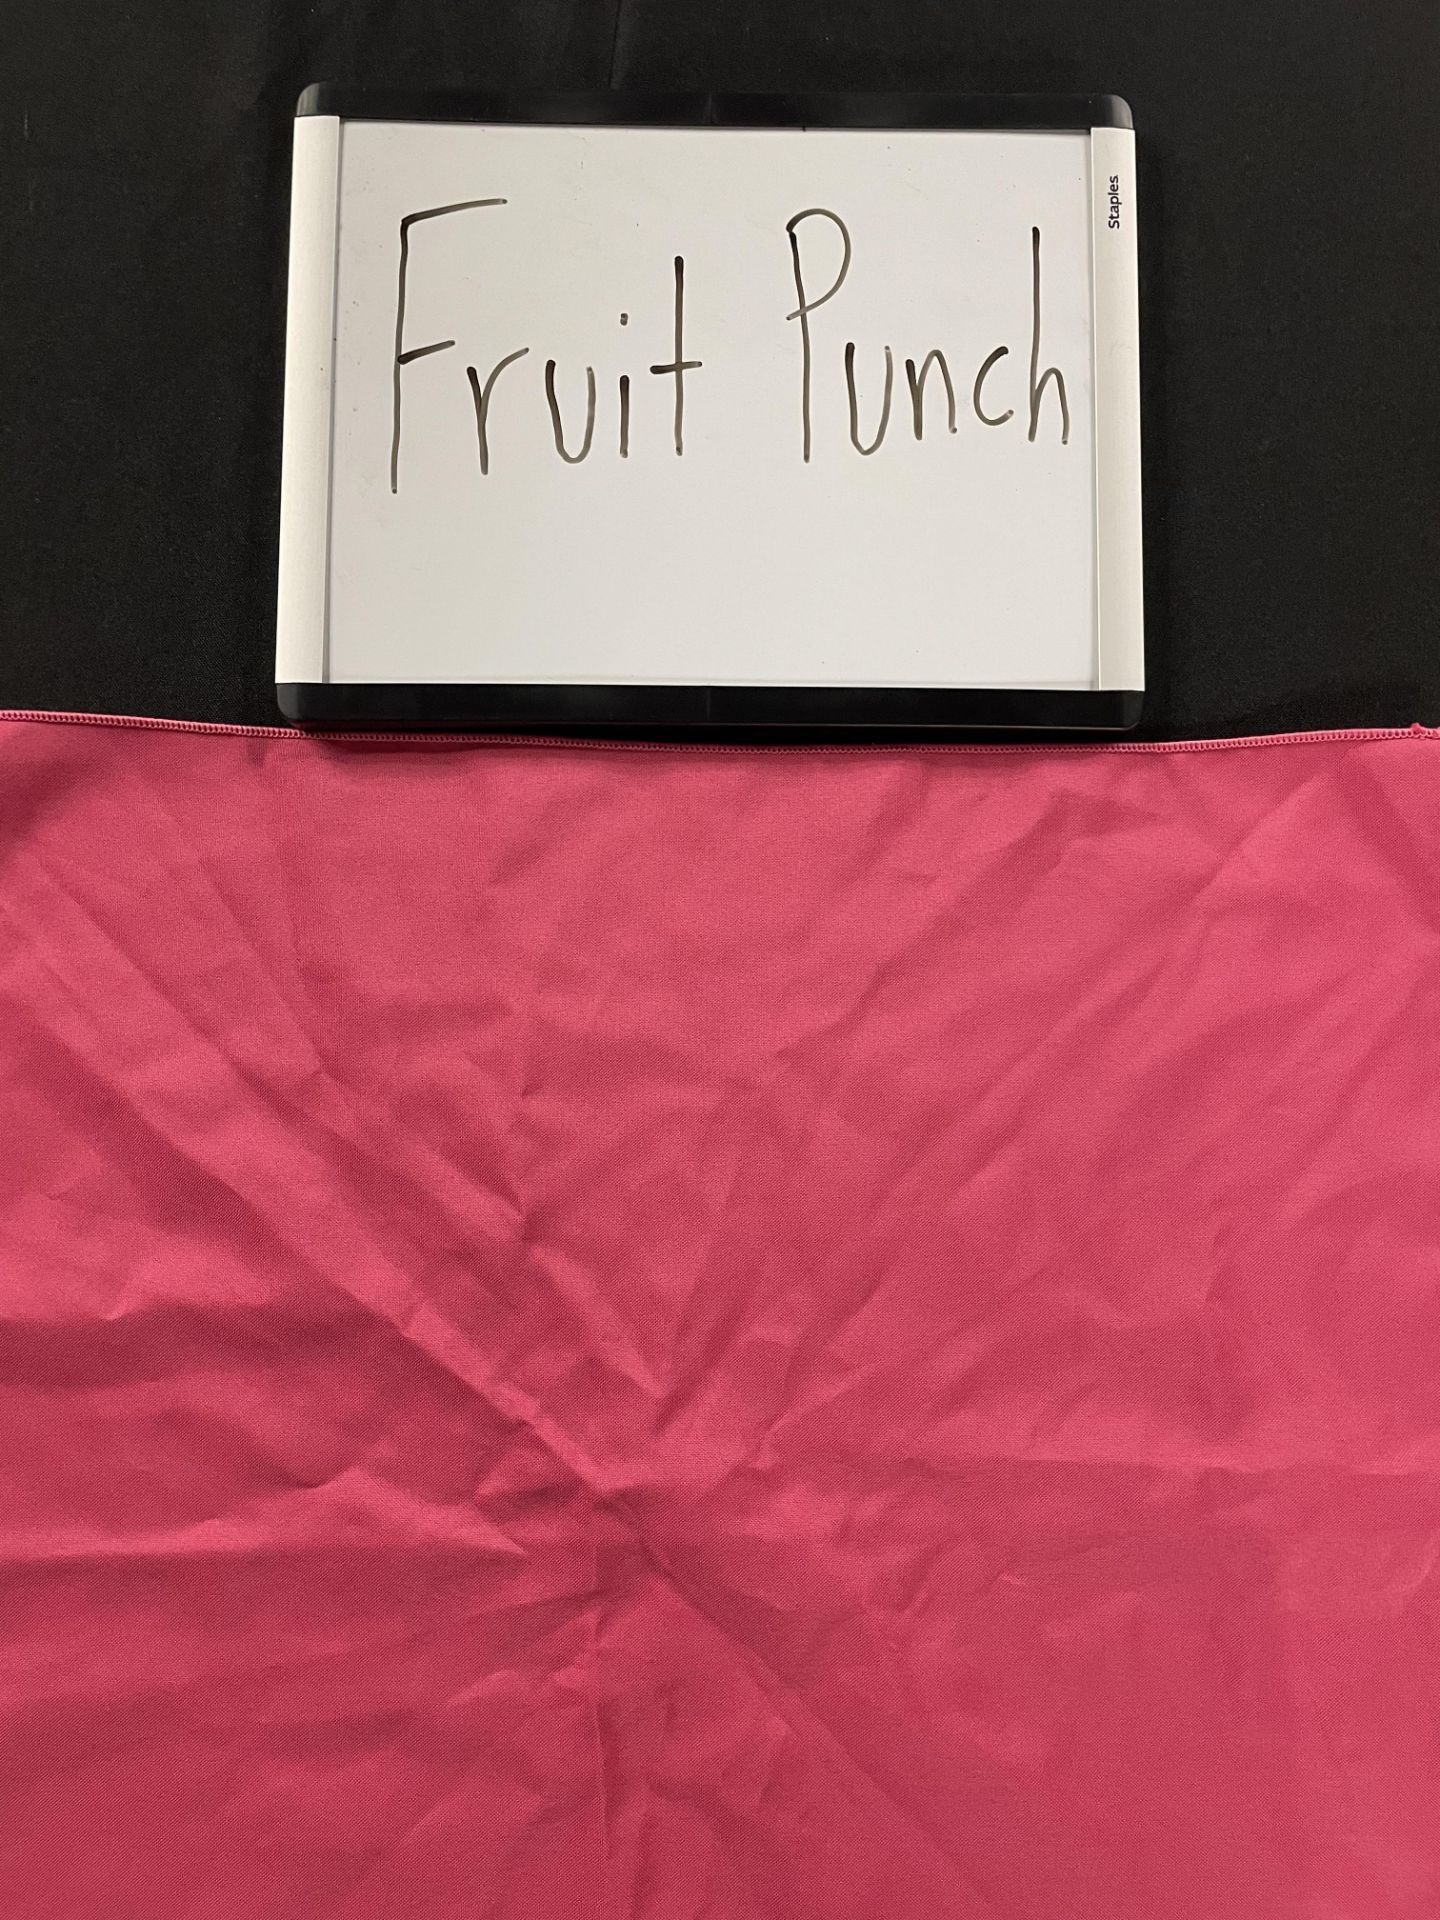 TABLECLOTH FRUIT PUNCH 54"X54" POLY